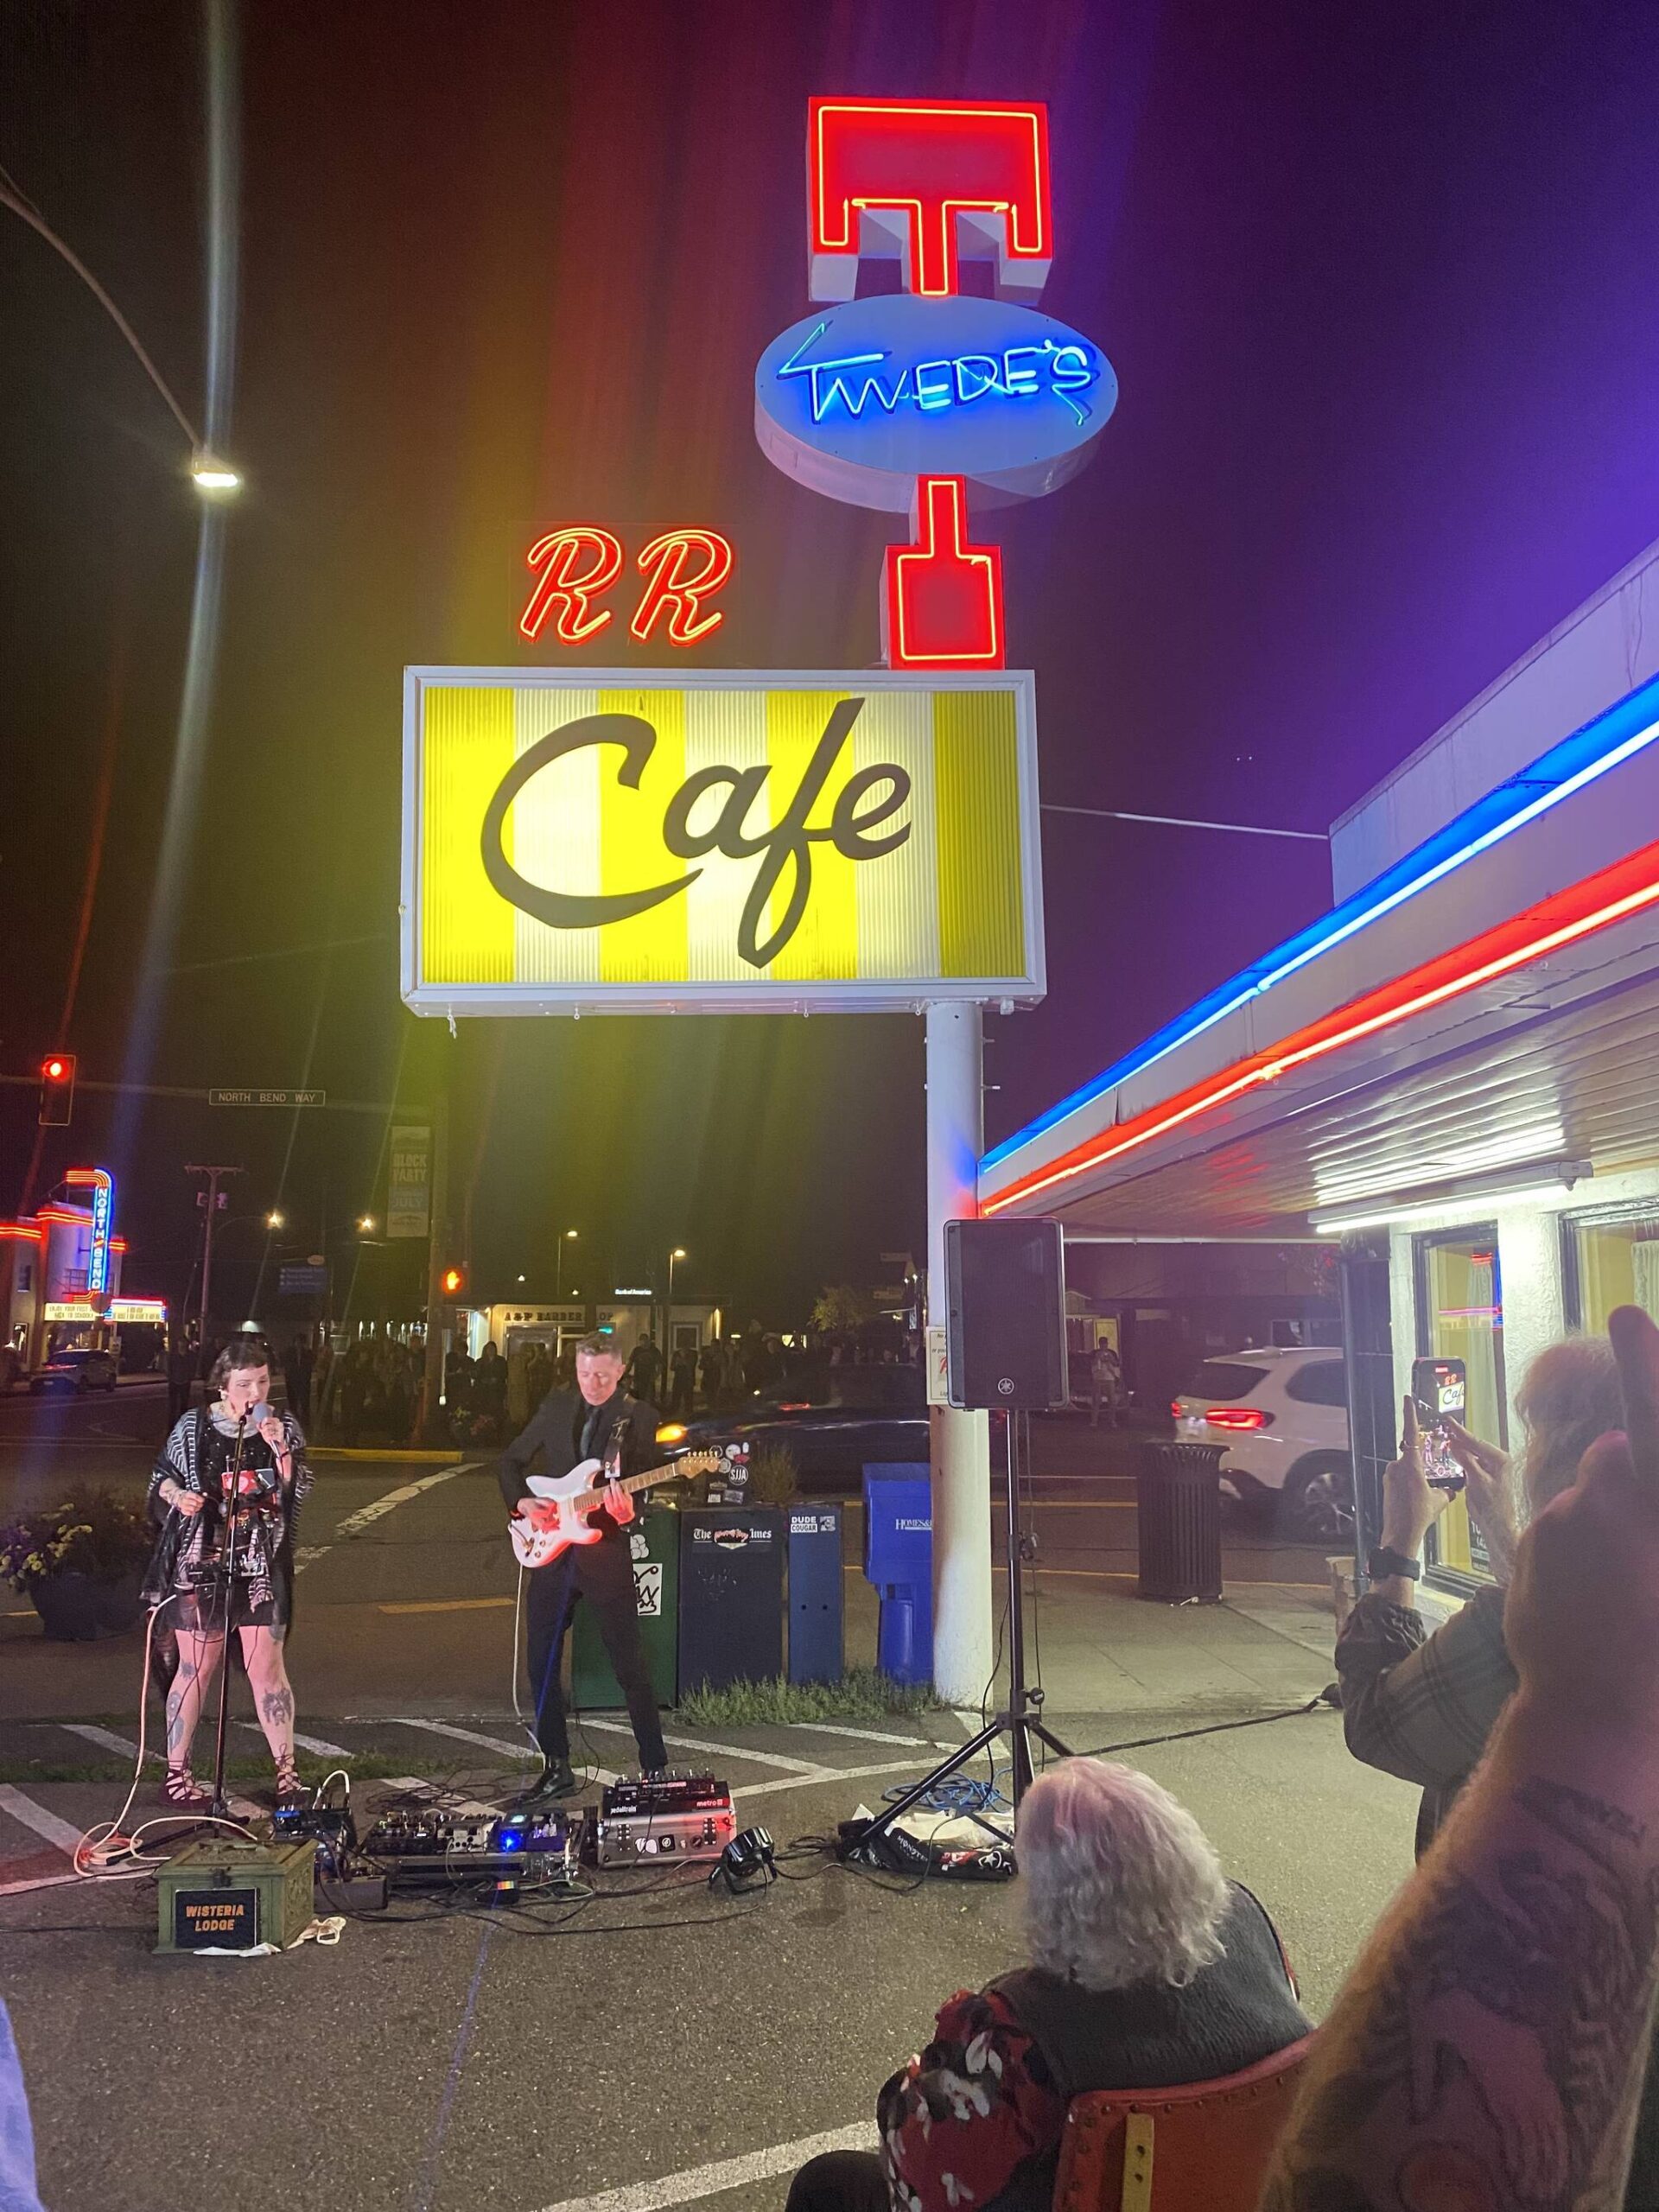 Wisteria Lodge plays during the unveiling of the RR sign at Twede’s Cafe on Aug. 28. Photo courtesy of Jeannie Bowers.